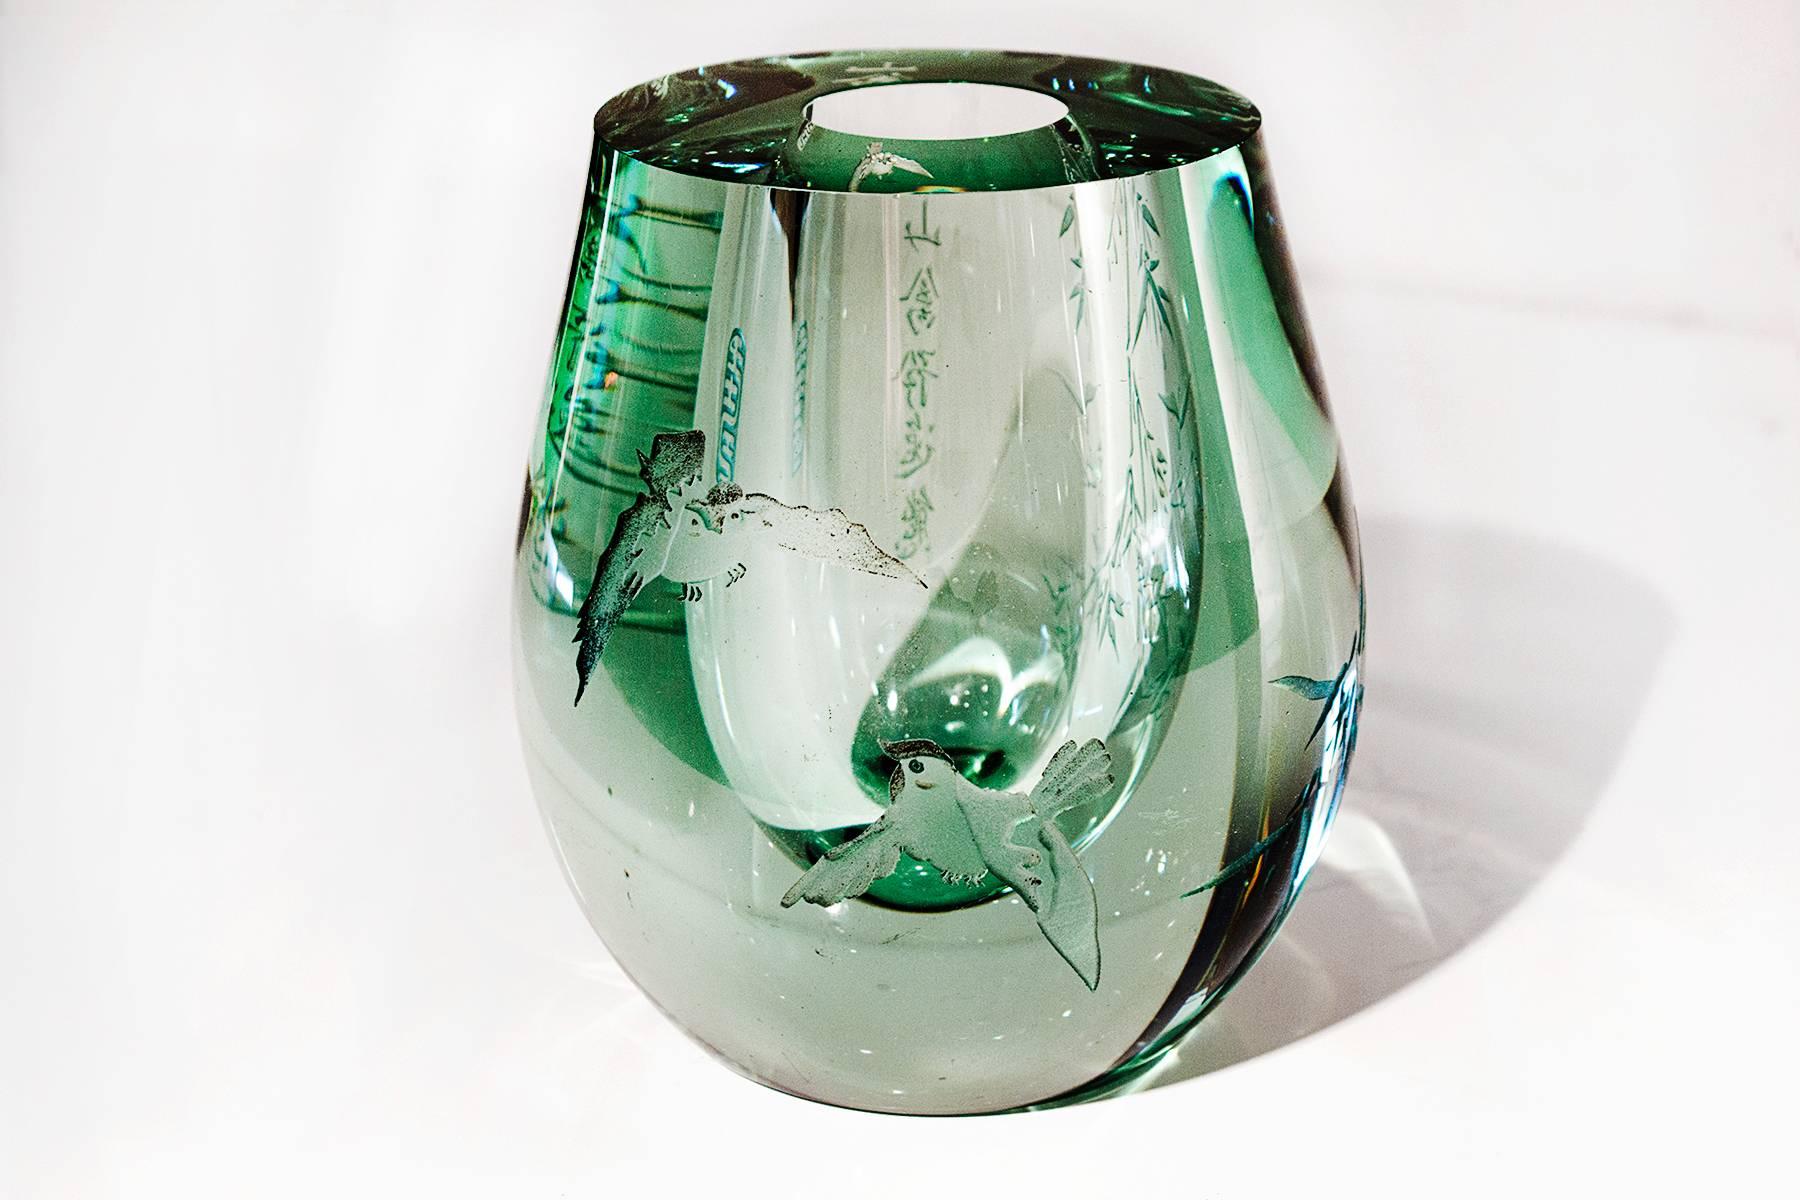 Super thick glass bud vase or candleholder with etched bamboo and bird motif. Etched characters and maker stamp on sides. Clear and subtle bluish green hue. A must have for the avid art glass collector. 

 Measures: 4.5